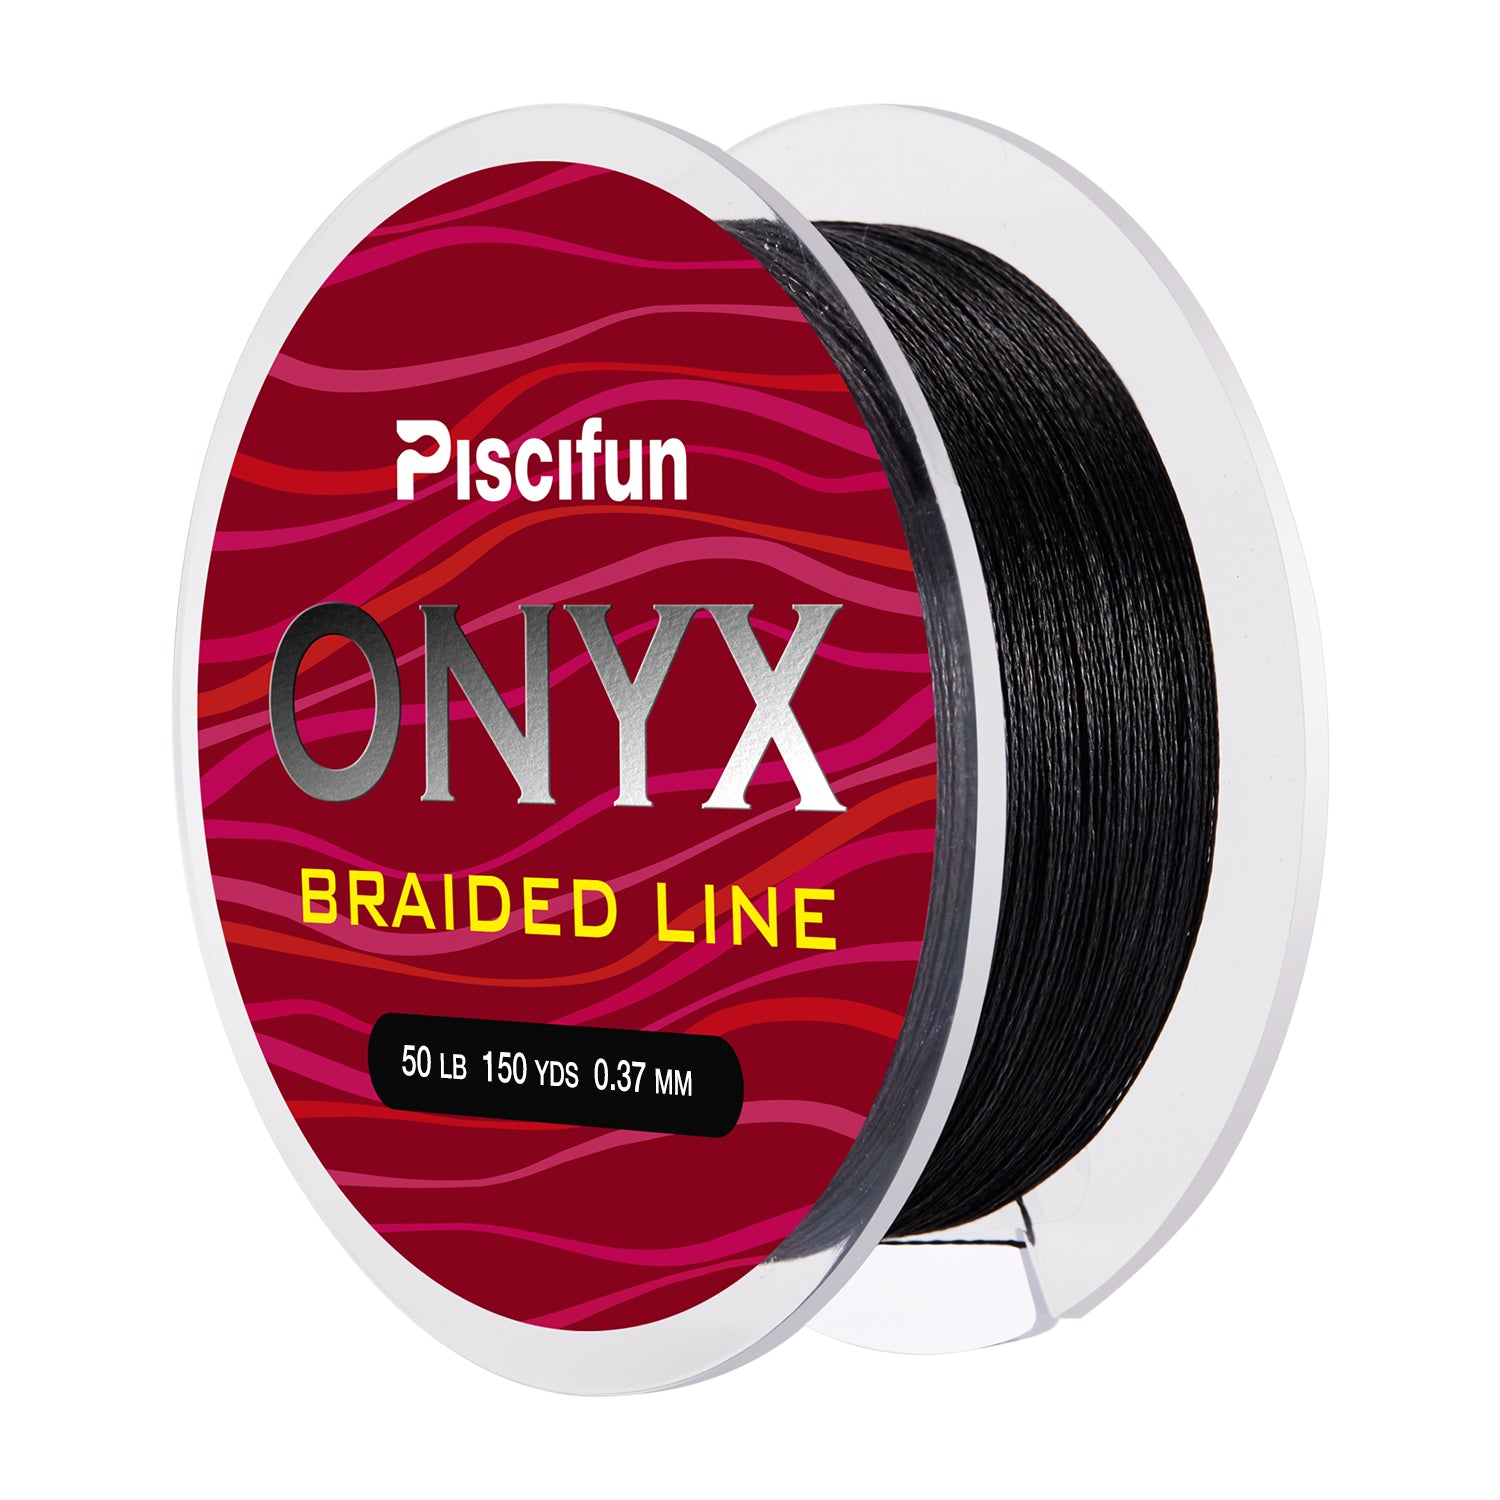 Piscifun Onyx Braided Fishing Line, Superline Abrasion Resistant Braided  Lines, Zero Stretch Super Strong, Low Memory, Fast Water Cutting PE Fishing